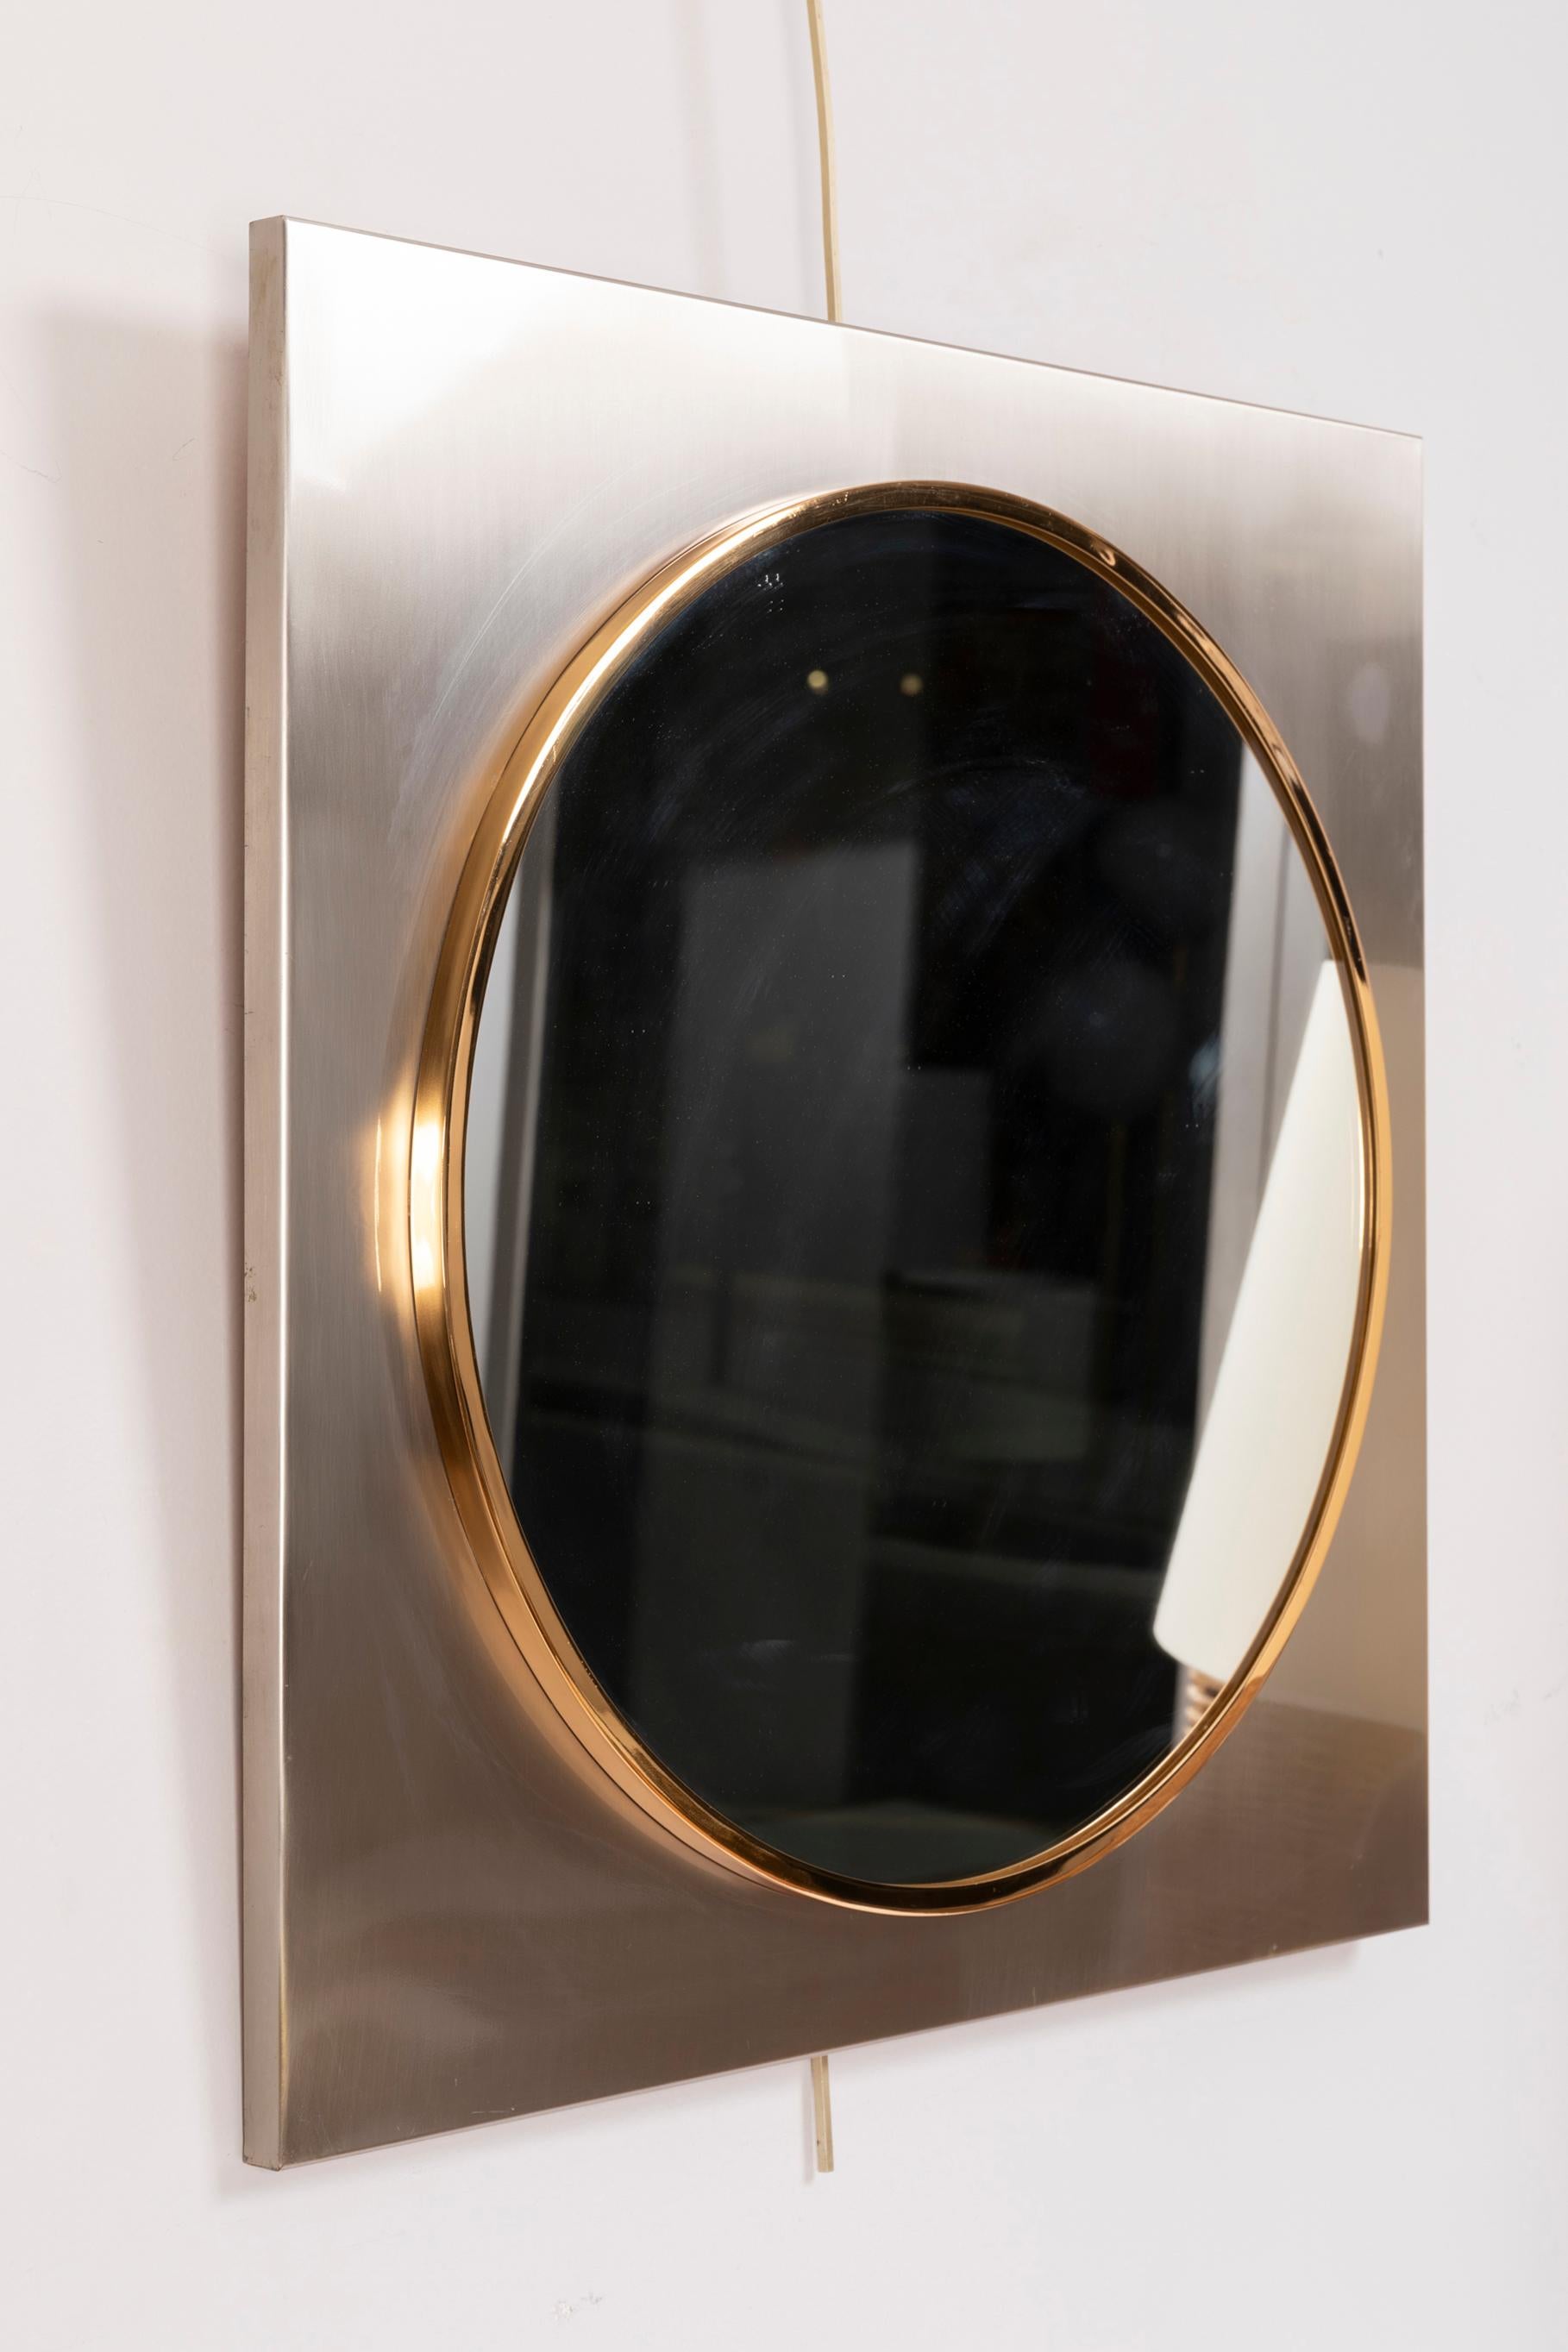 Square brushed steel framed, and round brass mirror.
The high quality fabrication reminds Jansen production.
France, 1970s

Dimensions: 
Height 60 cm, 23.6 in.
Width 60 cm, 23.6 in.
Depth 2 cm, 0.8 in.

      